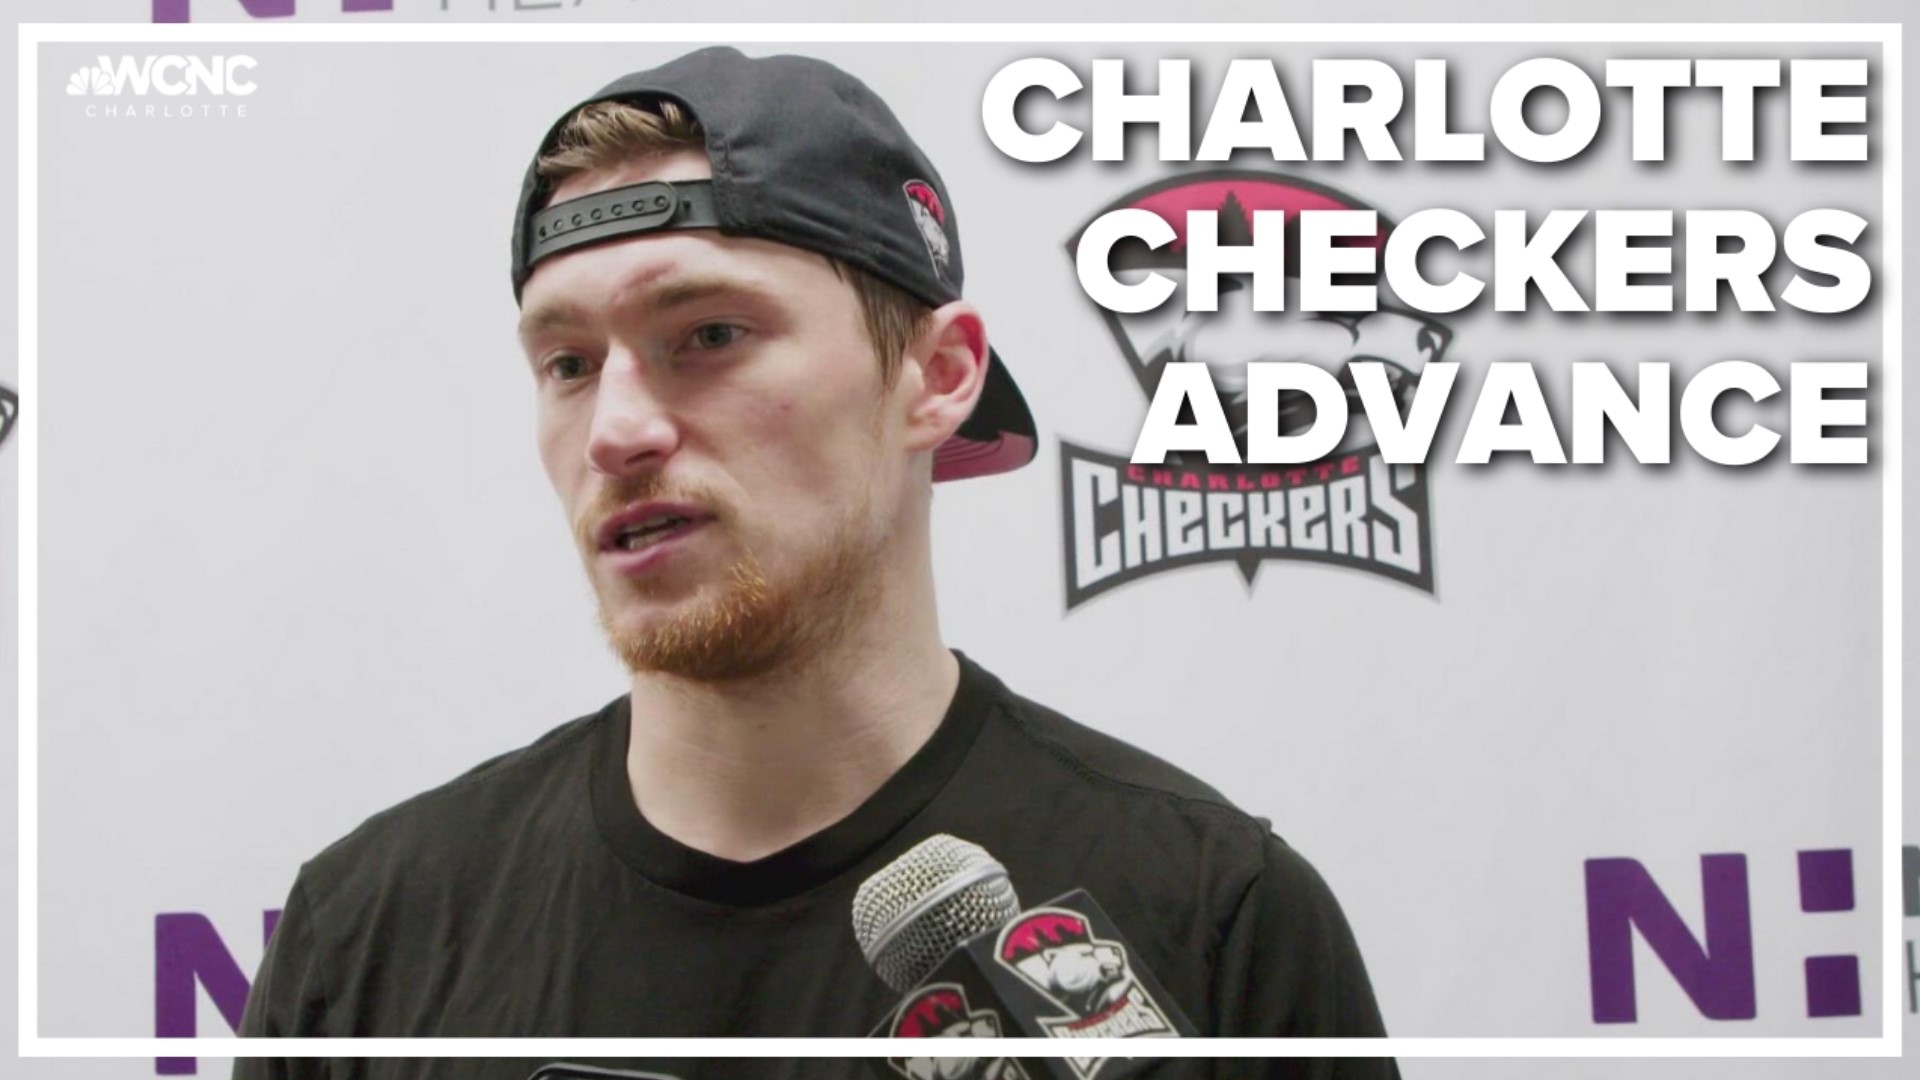 The Charlotte Checkers have advanced to the third round of the AHL's Calder Cup Playoffs.